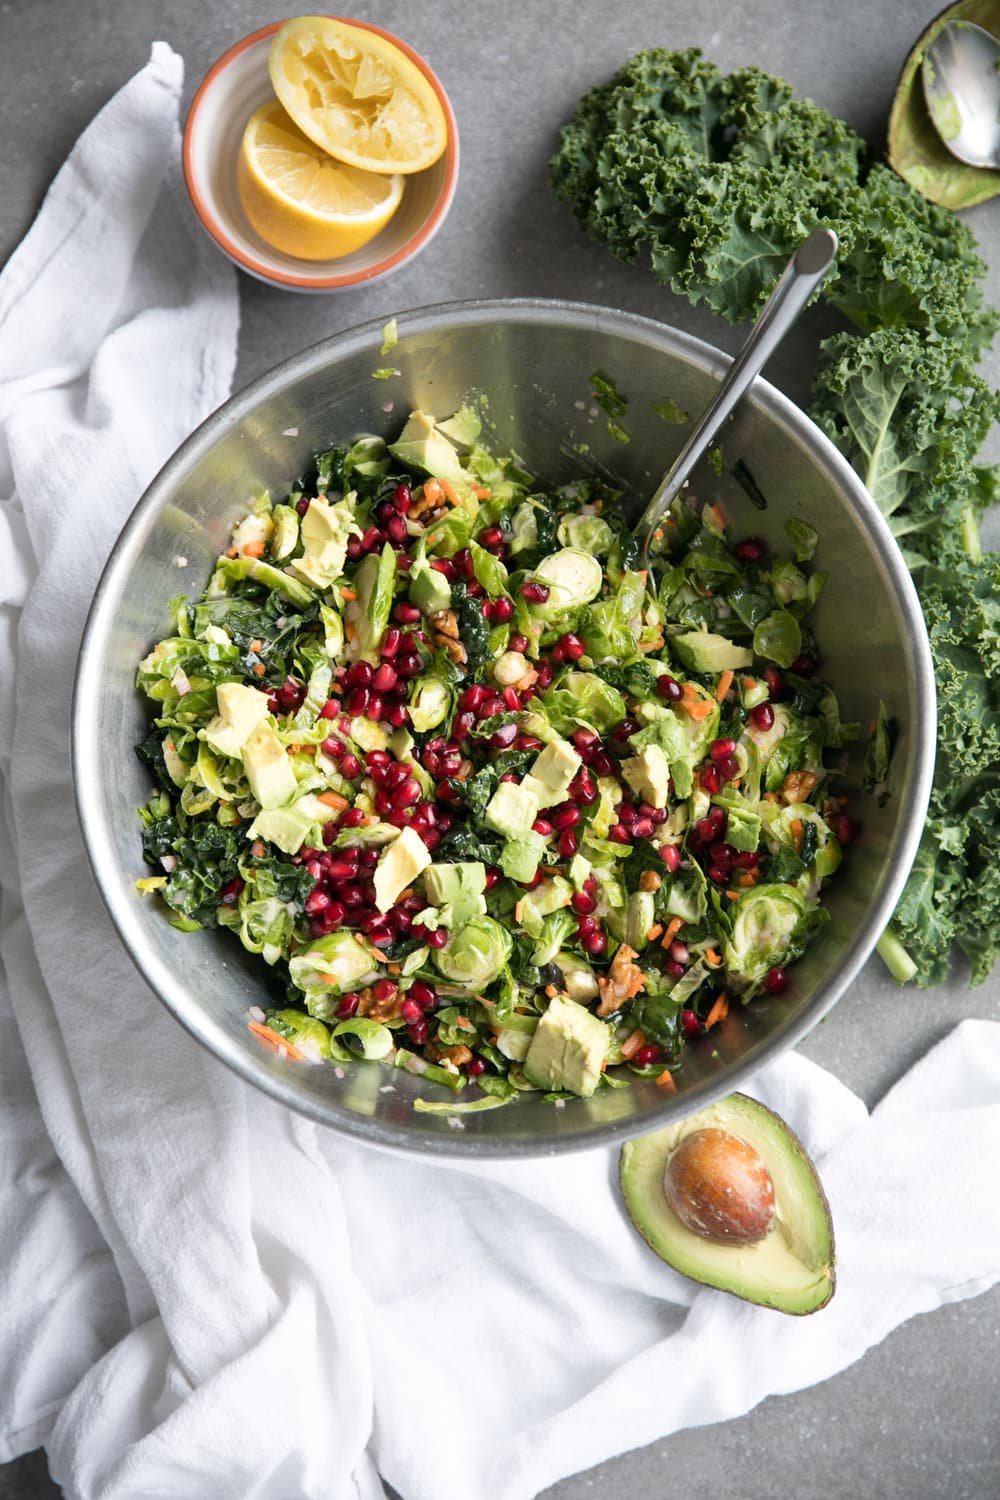 Overhead image of a mixing bowl filled with shredded Brussels sprouts, kale, avocado, grated carrot, pomegranate arils, tossed in a light lemon vinaigrette.